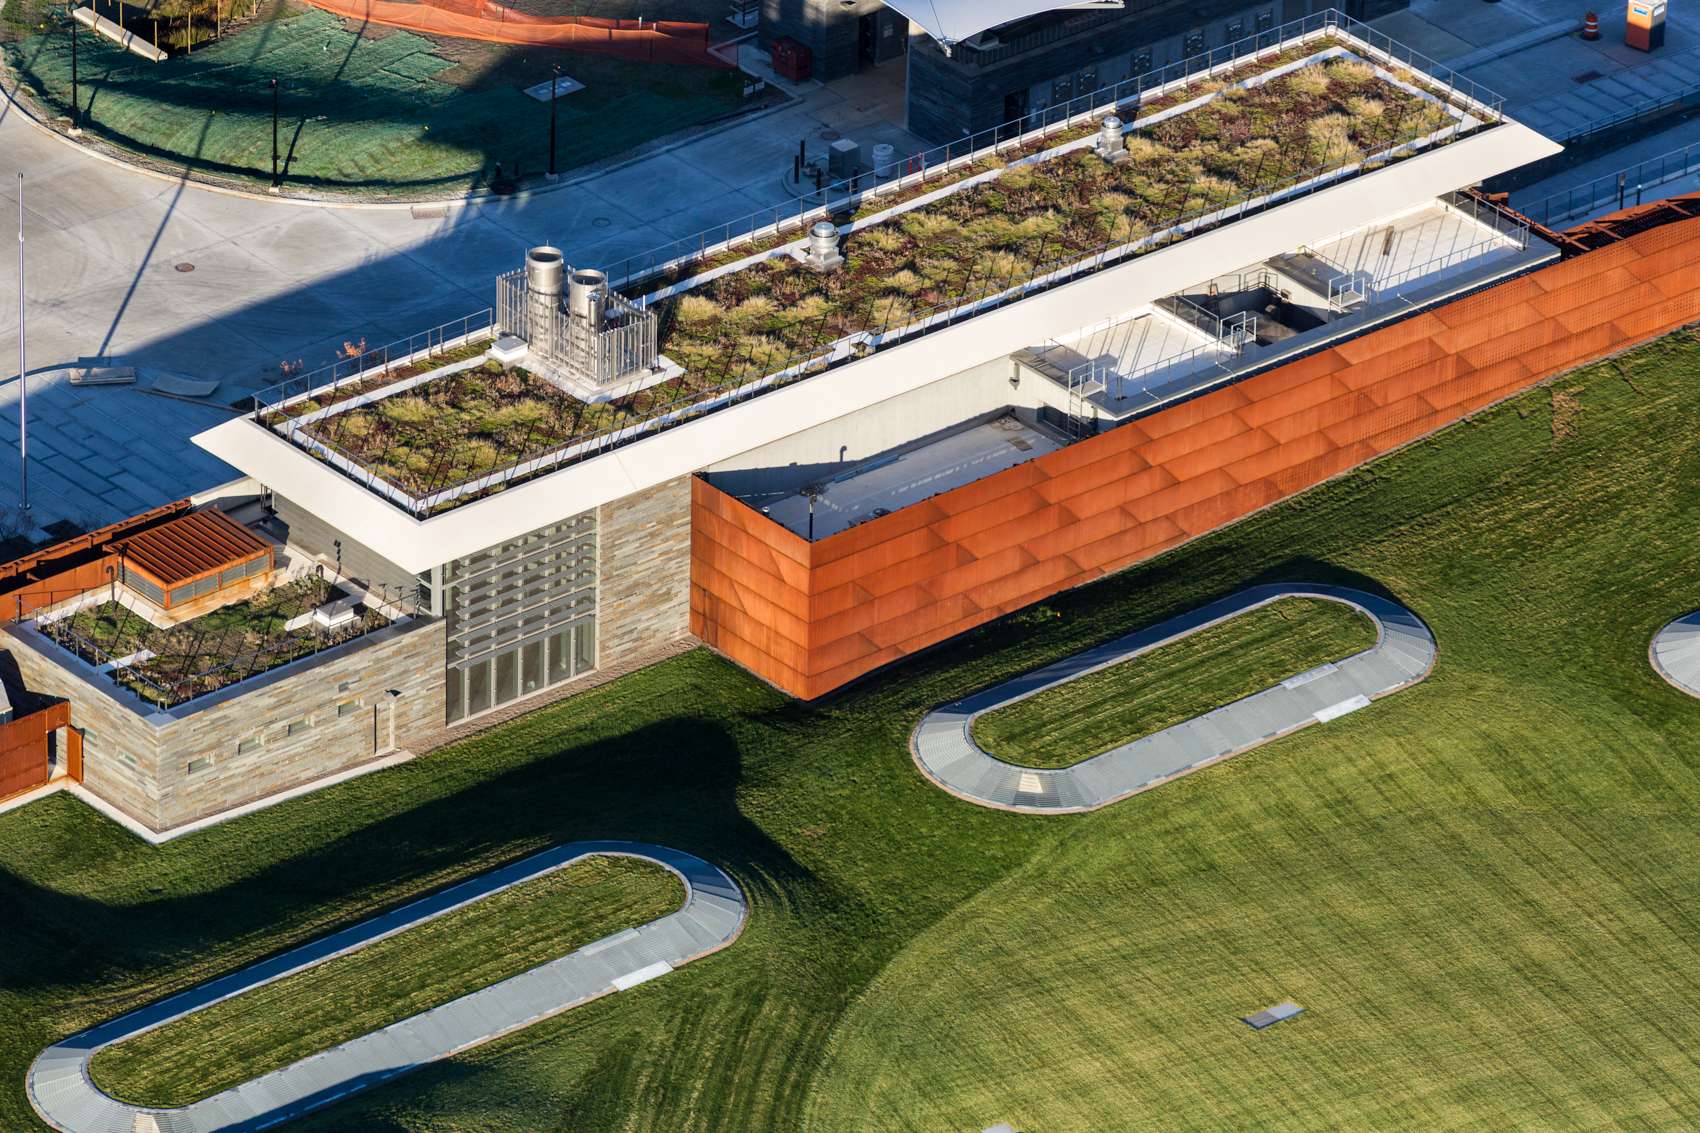 The Mosholu Golf Course, designed by Grimshaw Architects and Ken Smith Landscape Architects, is situated atop the Croton Water Treatment Plant in the Bronx, NY. Croton  is the largest infrastructure project for the City of New York, processing a third of NYC's drinking water. The building is nine acres wide, and sinks 12 stories into the earth. The golf course, which is the largest continuous living roof in North America, is the only visible part of the plant. Croton is surrounded by a wetland stormwater and groundwater management system designed by Great Ecology as part of the Grimshaw Architects team.